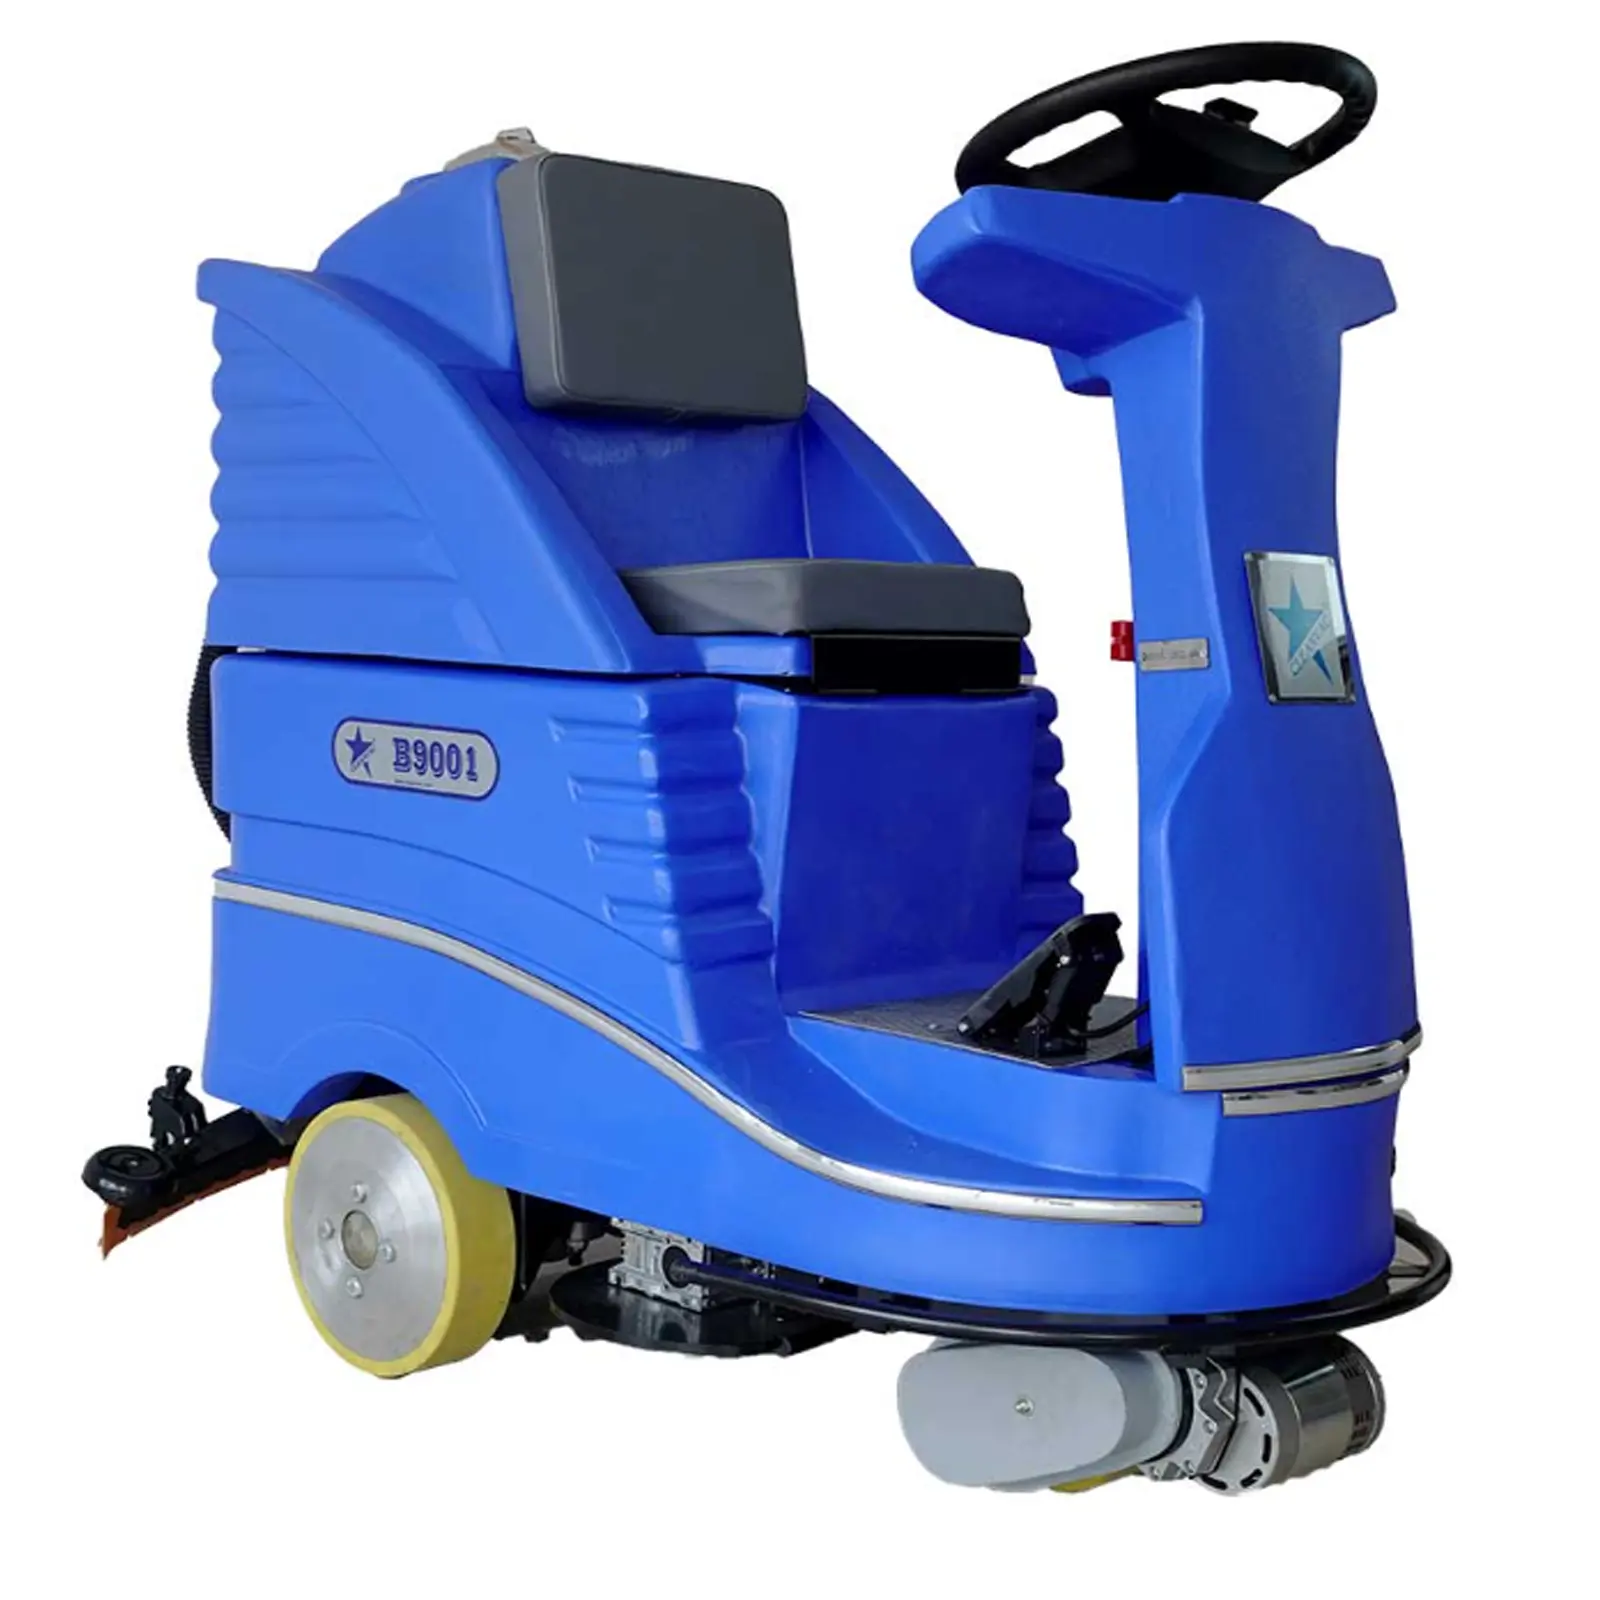 Ride on type floor cleaning scrubber for hard floors marble granite machine best price from Turkey